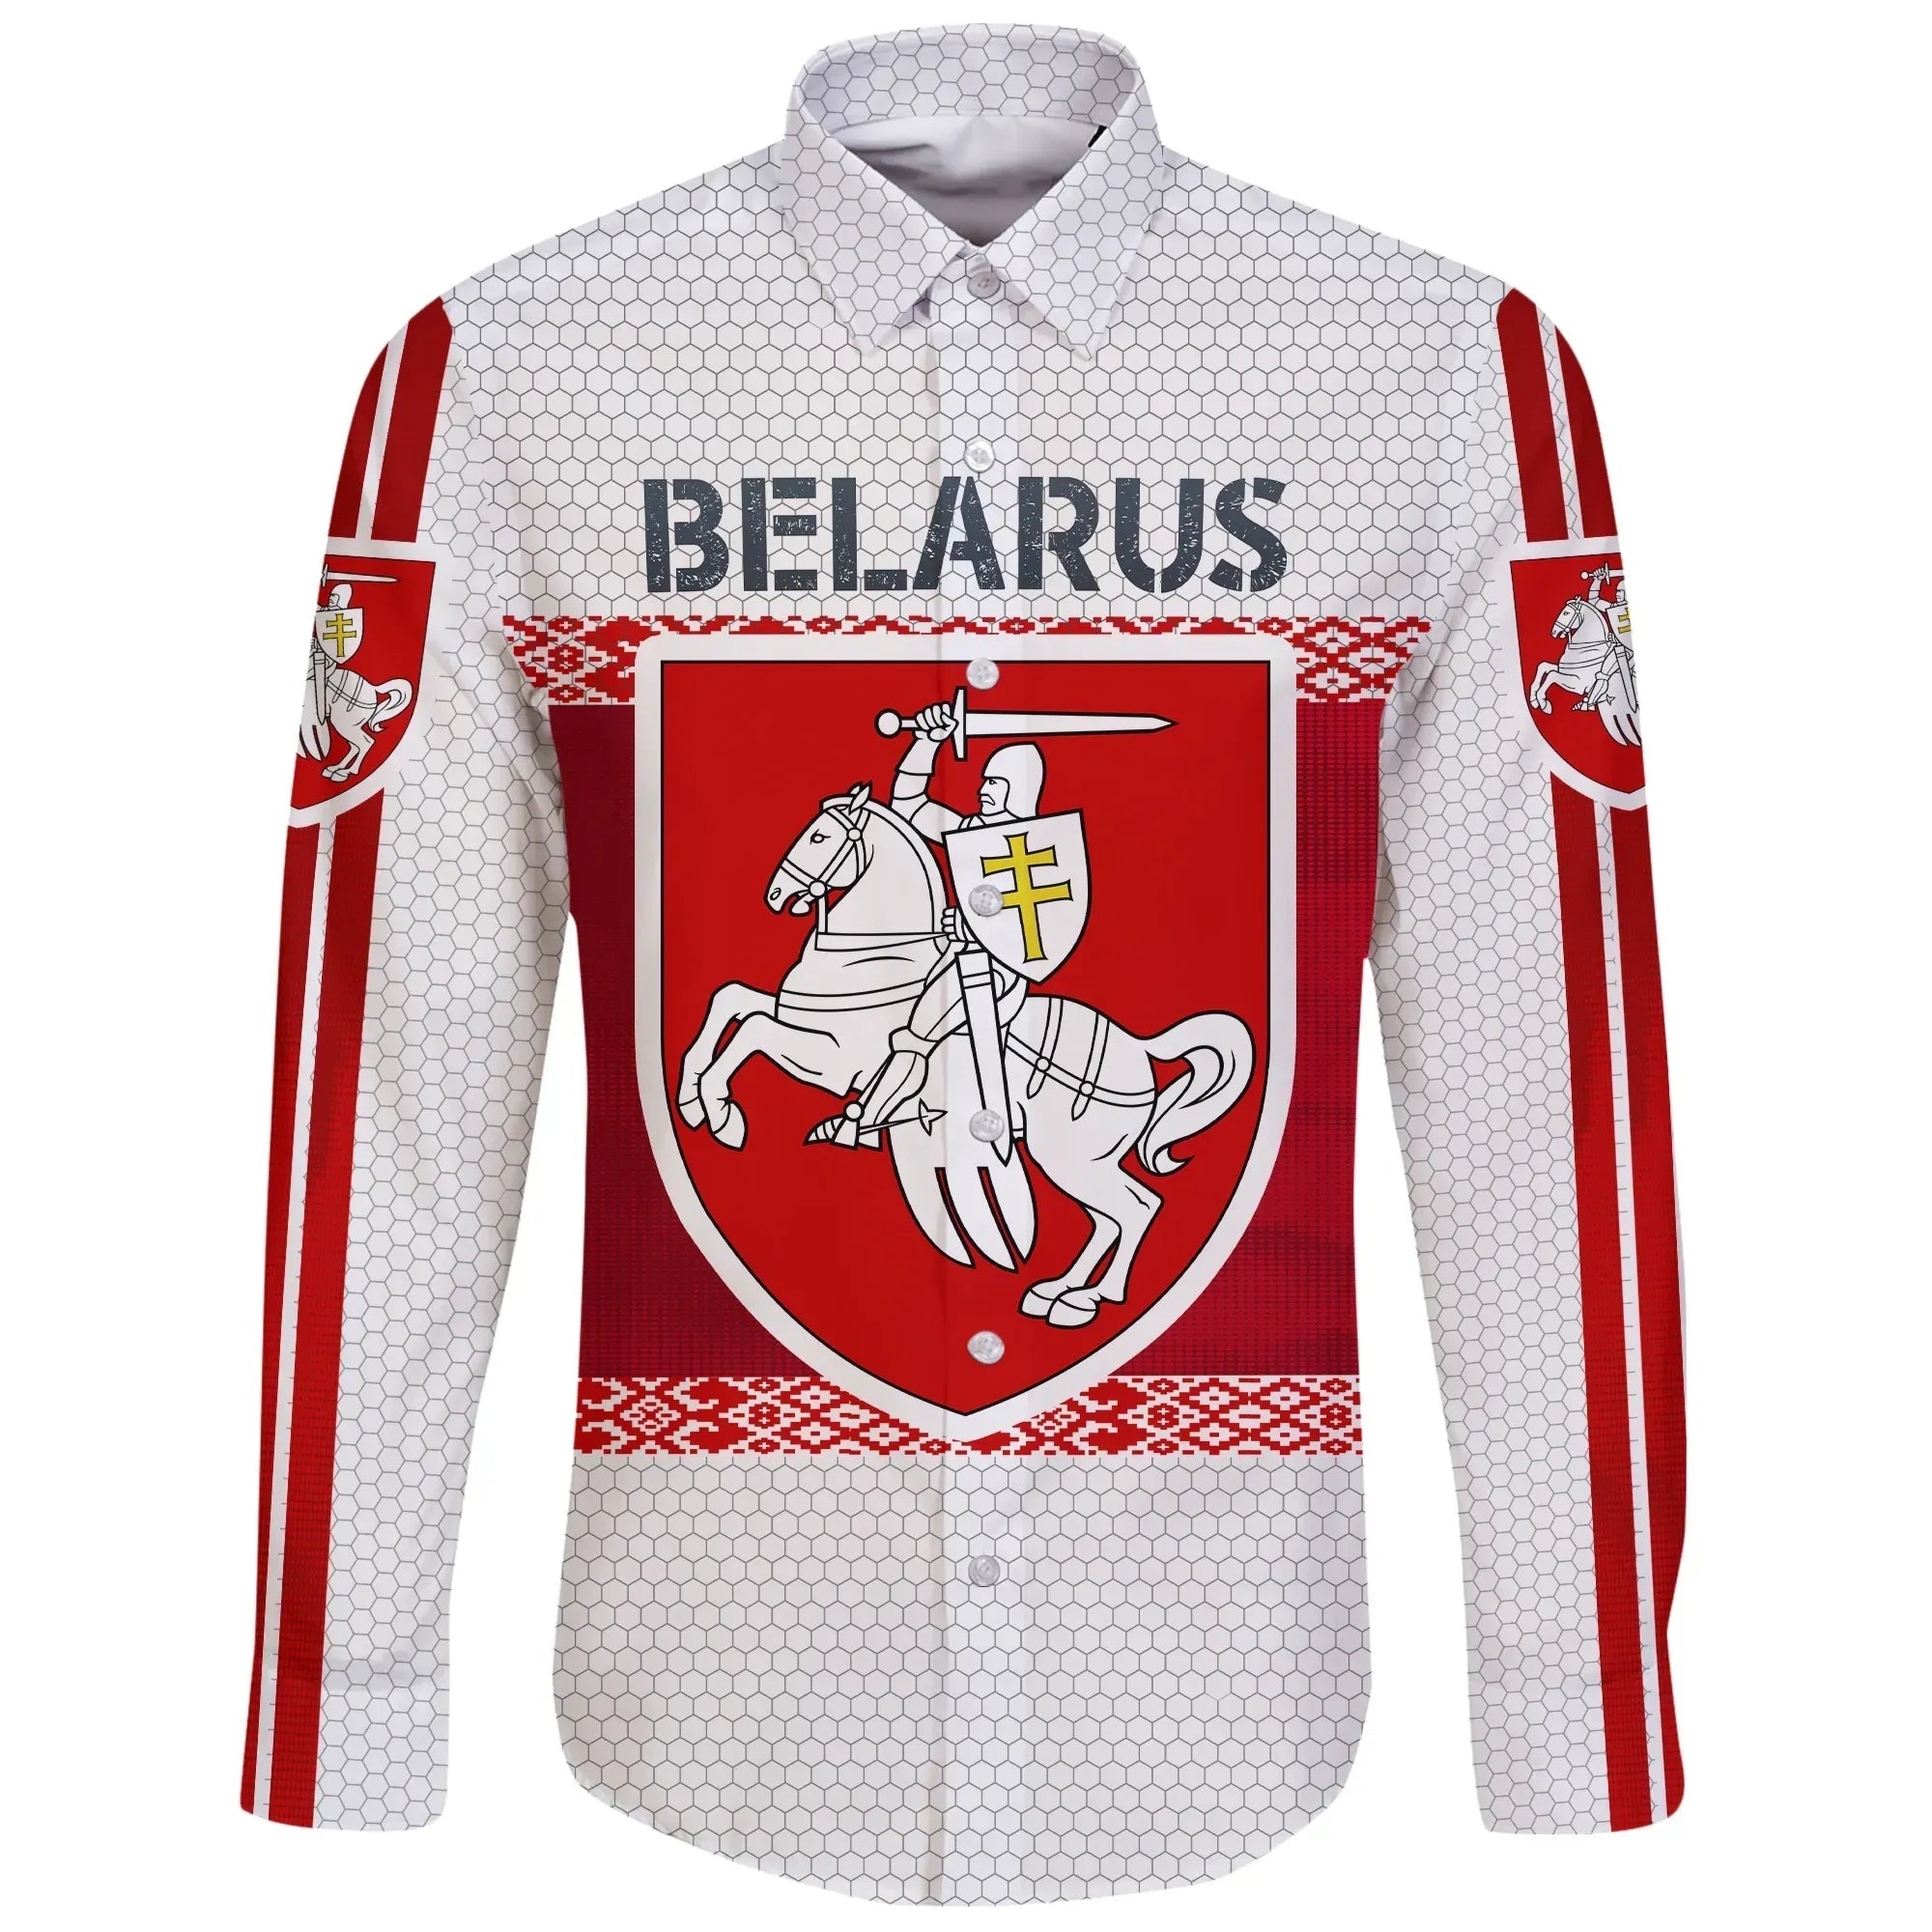 belarus-coat-of-arms-long-sleeve-button-shirt-special